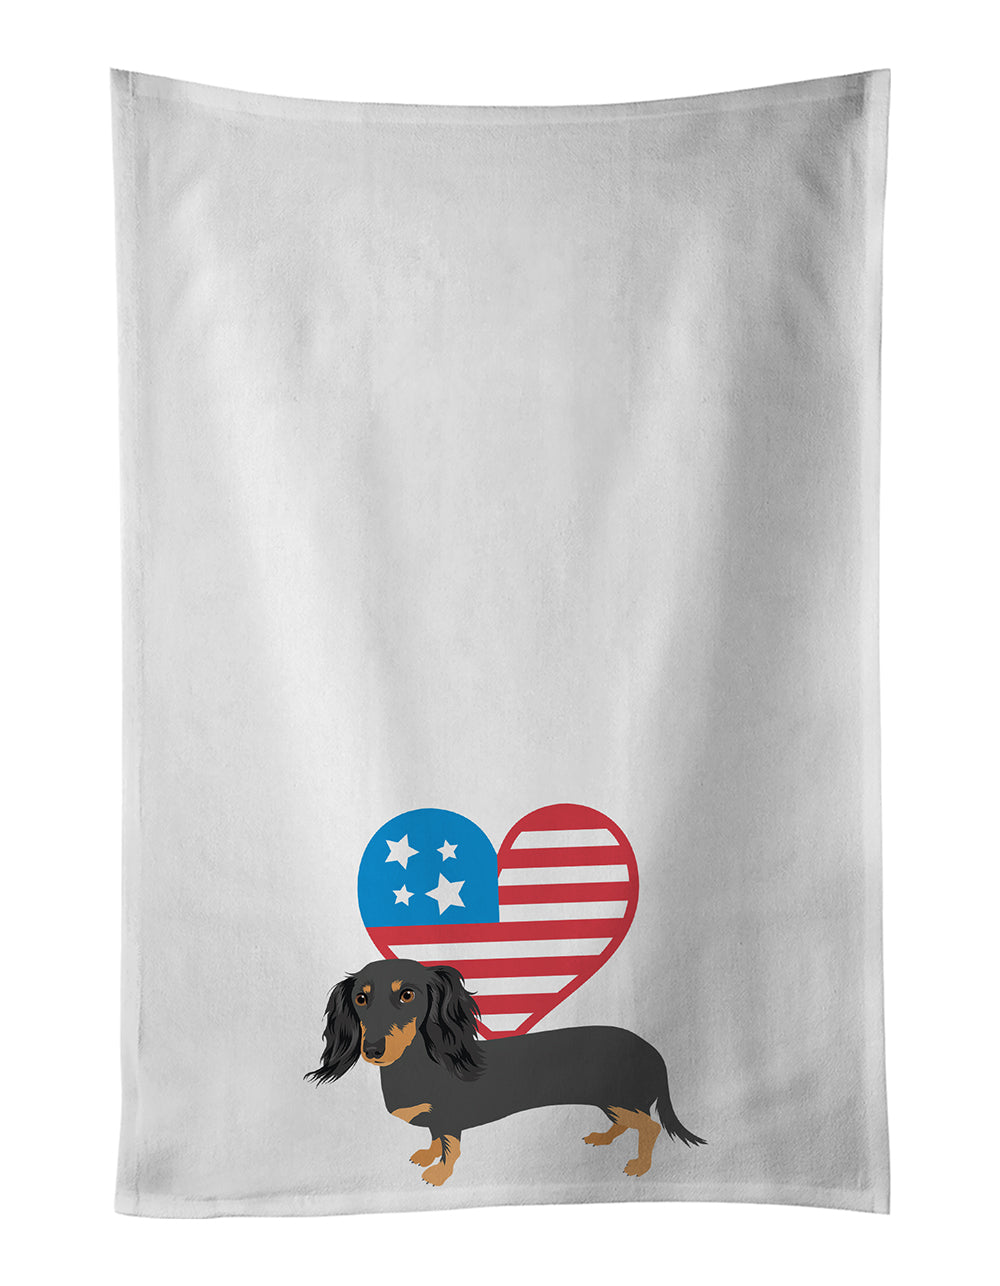 Buy this Dachshund Black and Tan #2 Patriotic White Kitchen Towel Set of 2